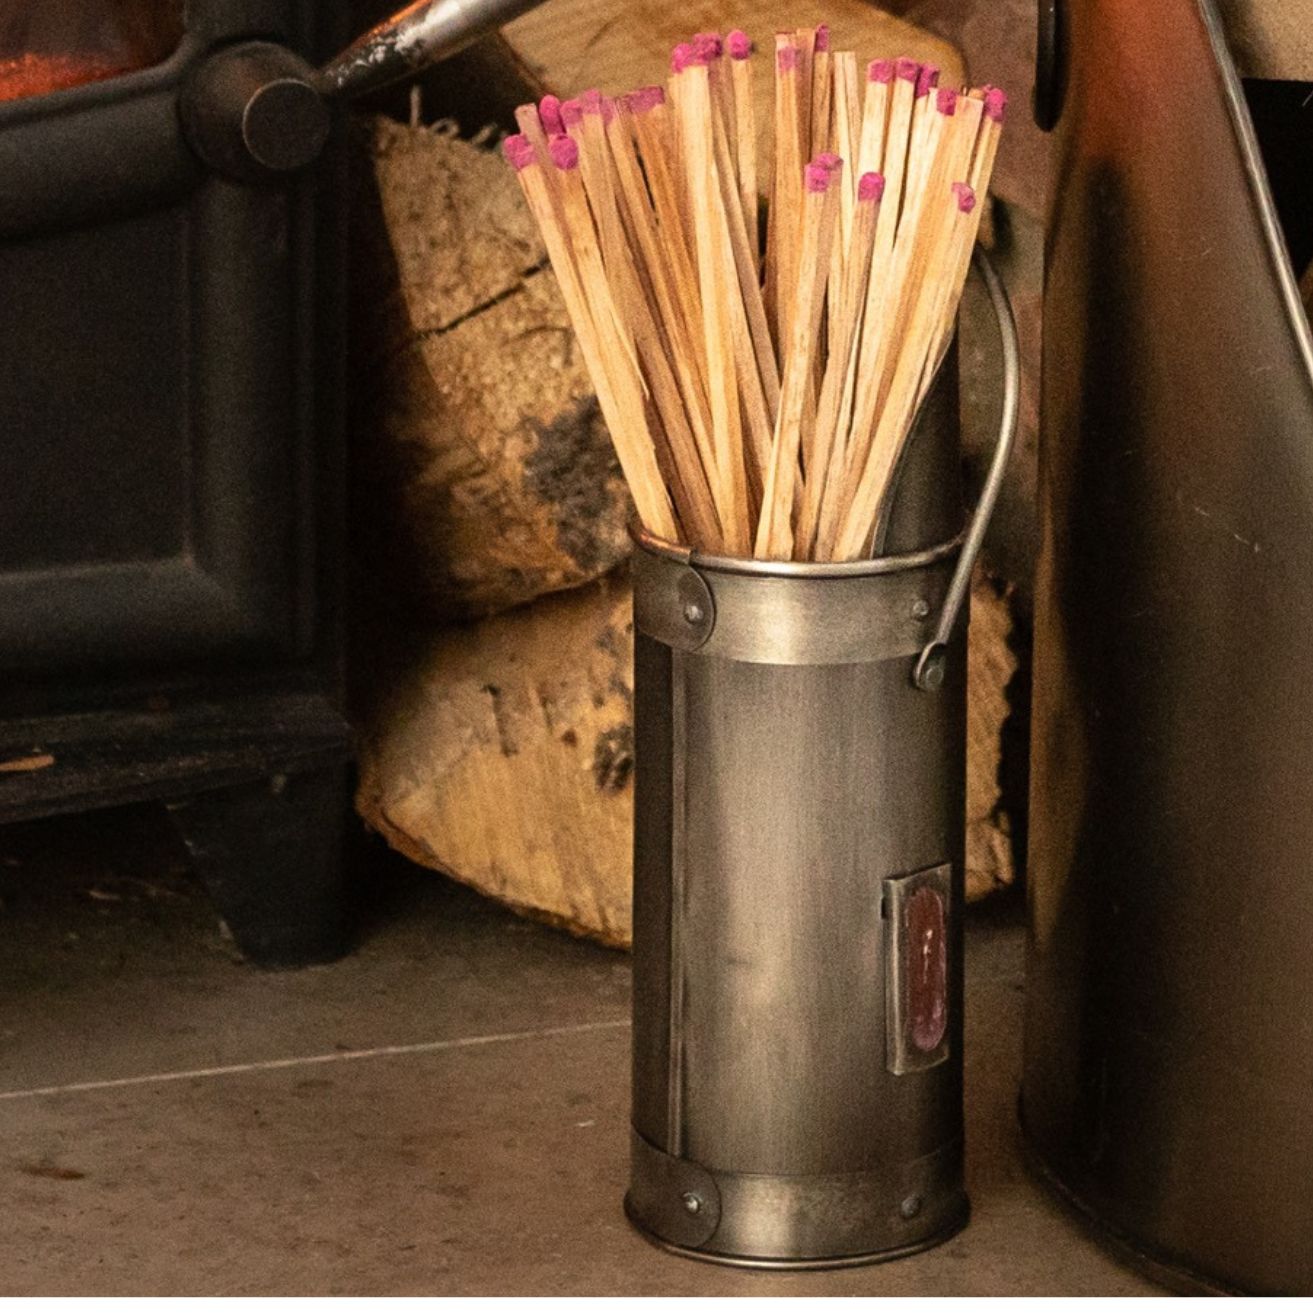 Matchstick Holder with 60 matches for fireplace